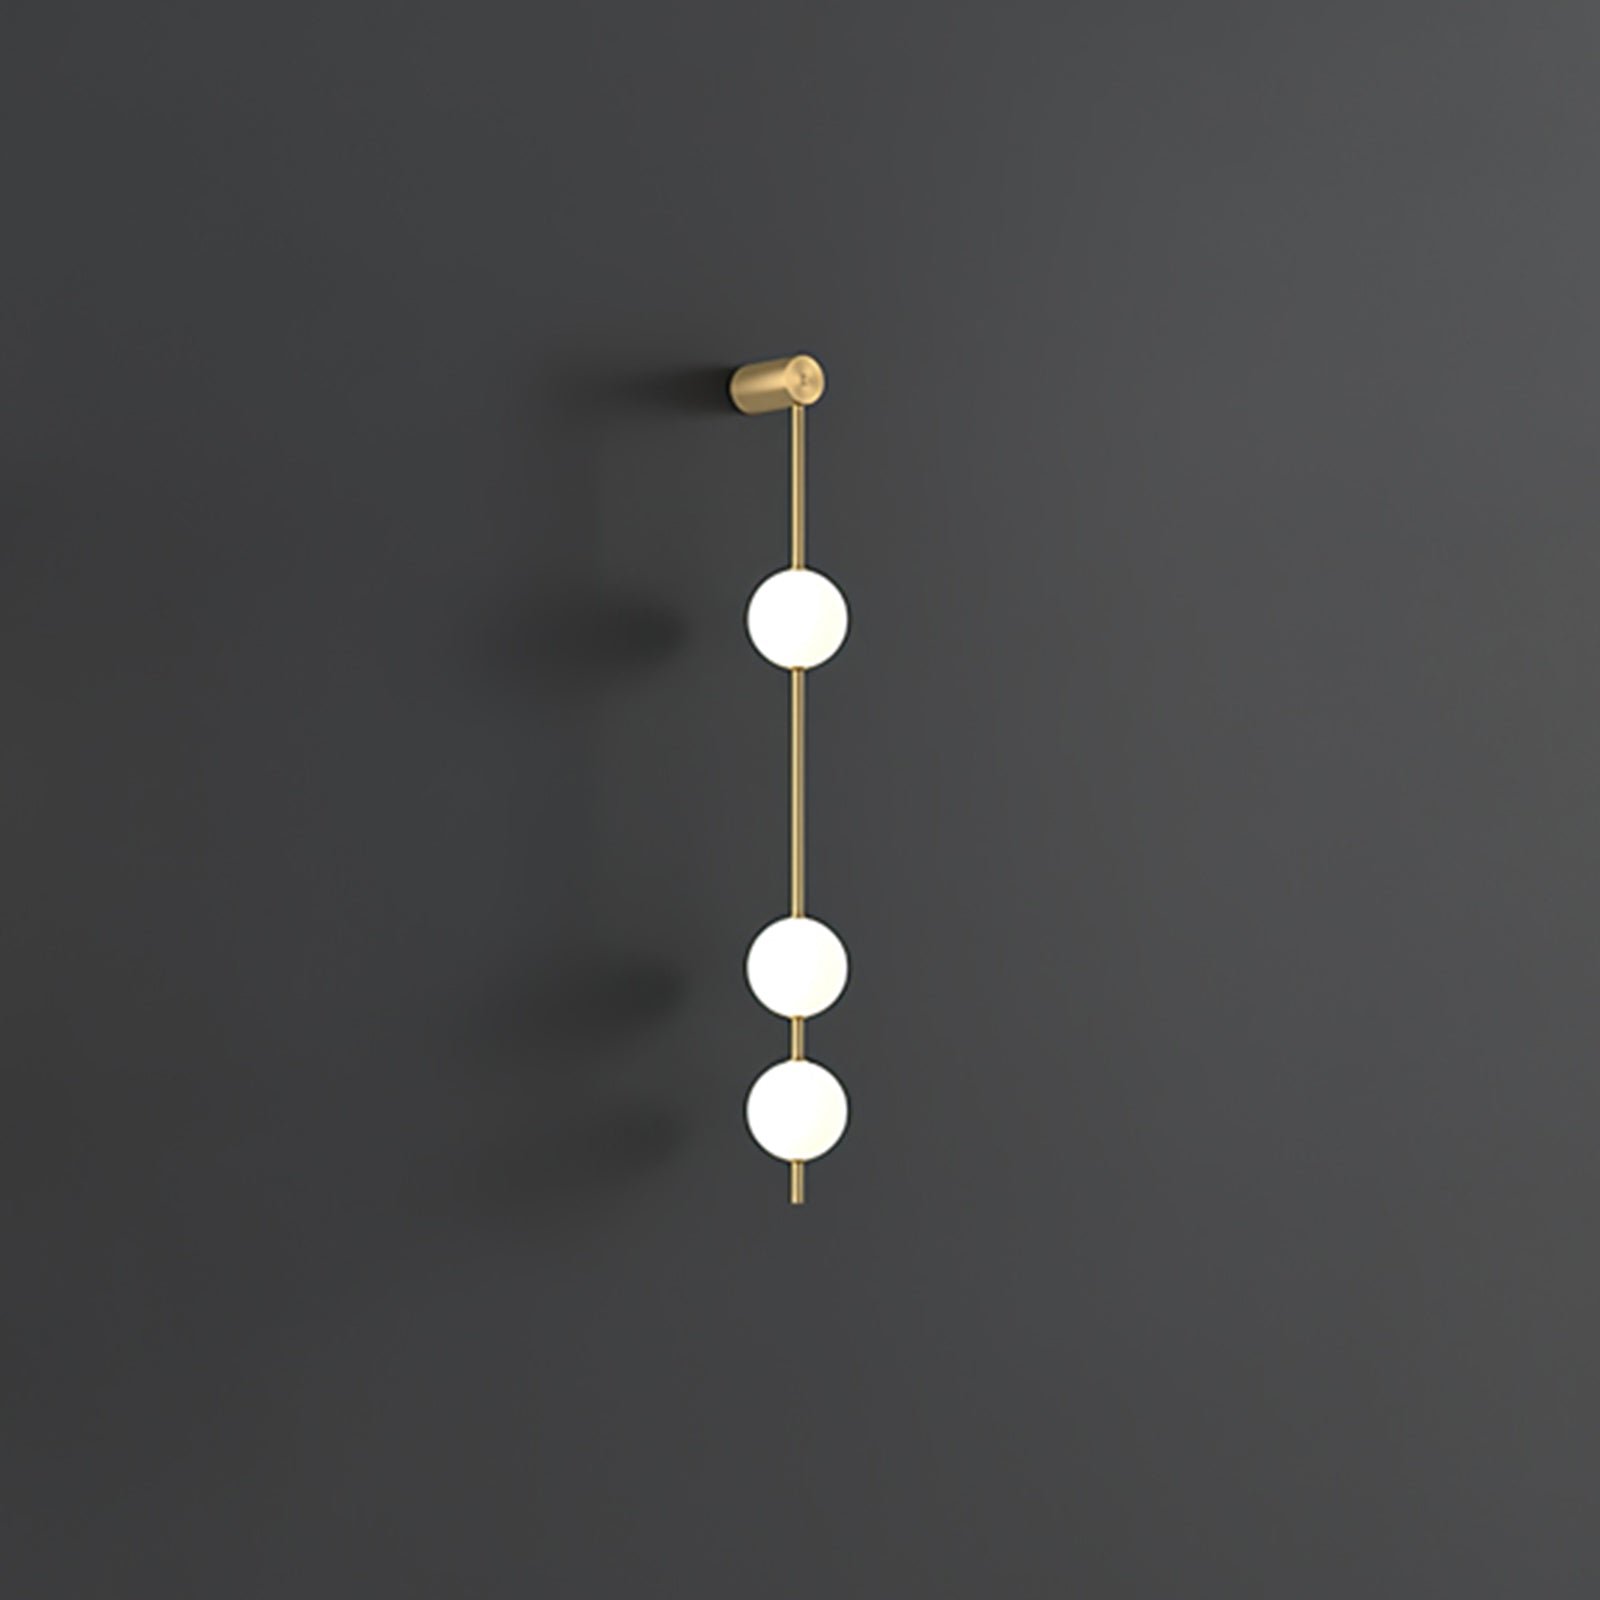 Set of 2 Brass and White Vertical Balls Wall Lamp with 3 Lamps, emitting Warm White Light